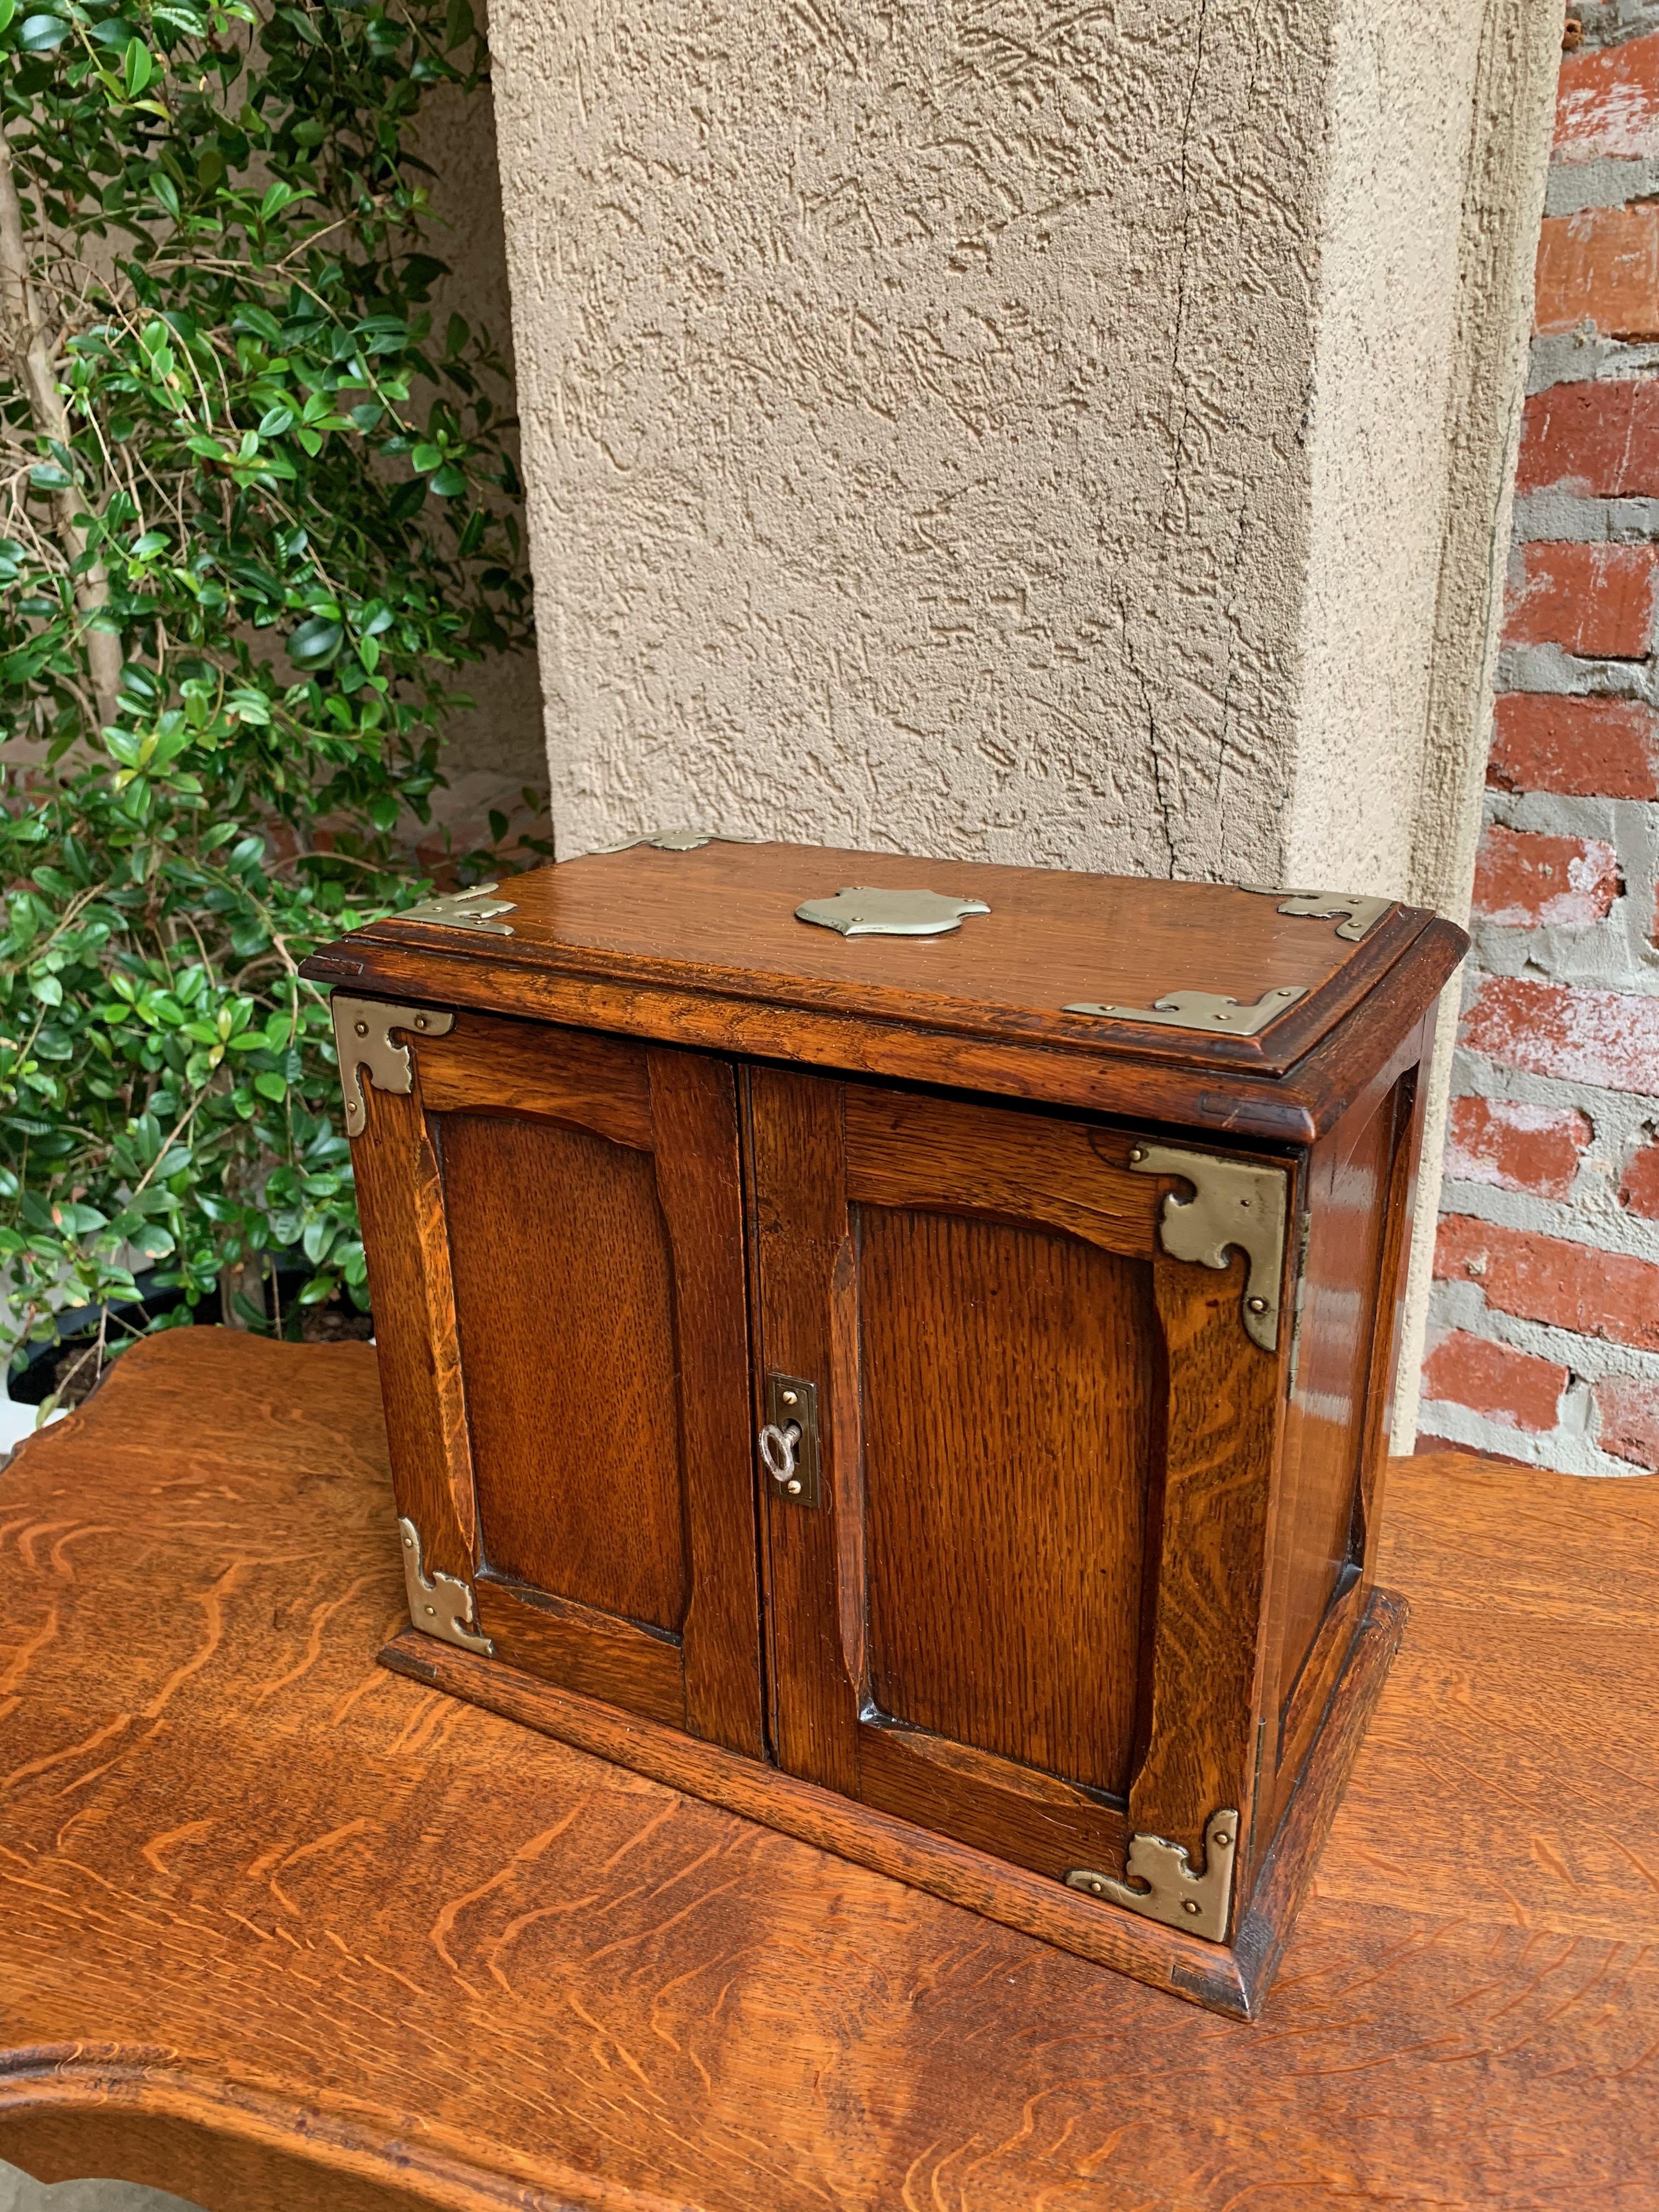 ~Direct from England~
~From our most recent buying trip, we have an entire collection of antique English “gentleman’s cabinets”!! Many have dated, engraved presentation plaques, and all of them are fabulous!~
~Typically these boxes were used for